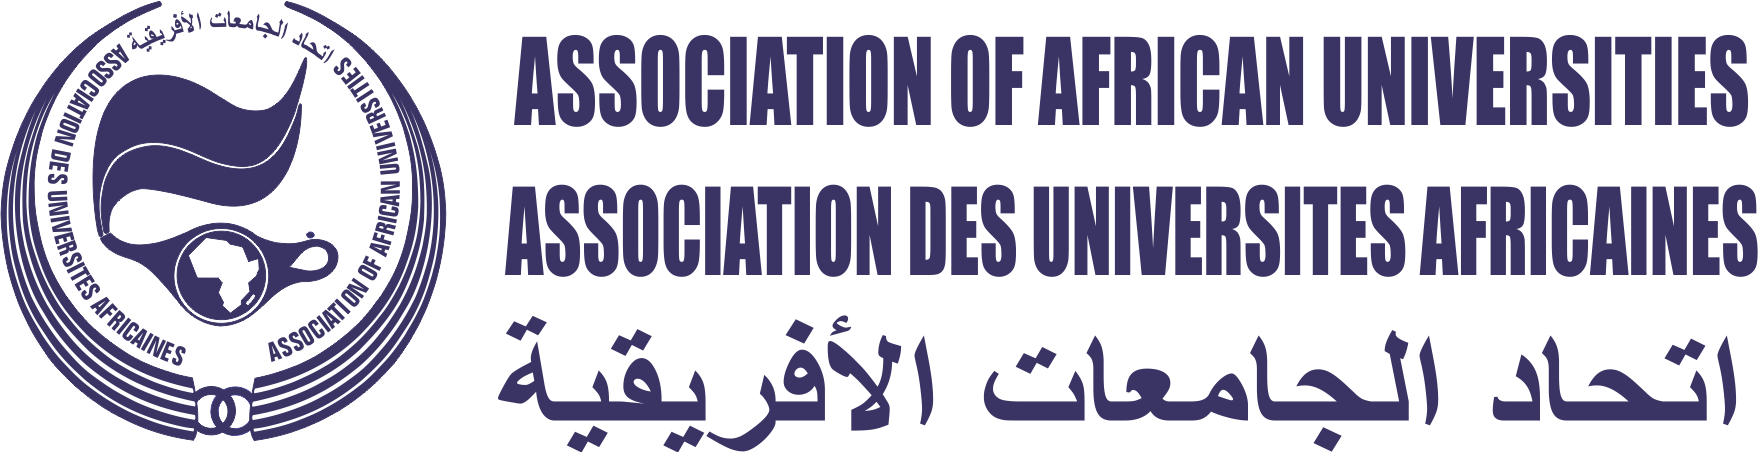 Database of African Theses and Dissertations-Research (DATAD-R)